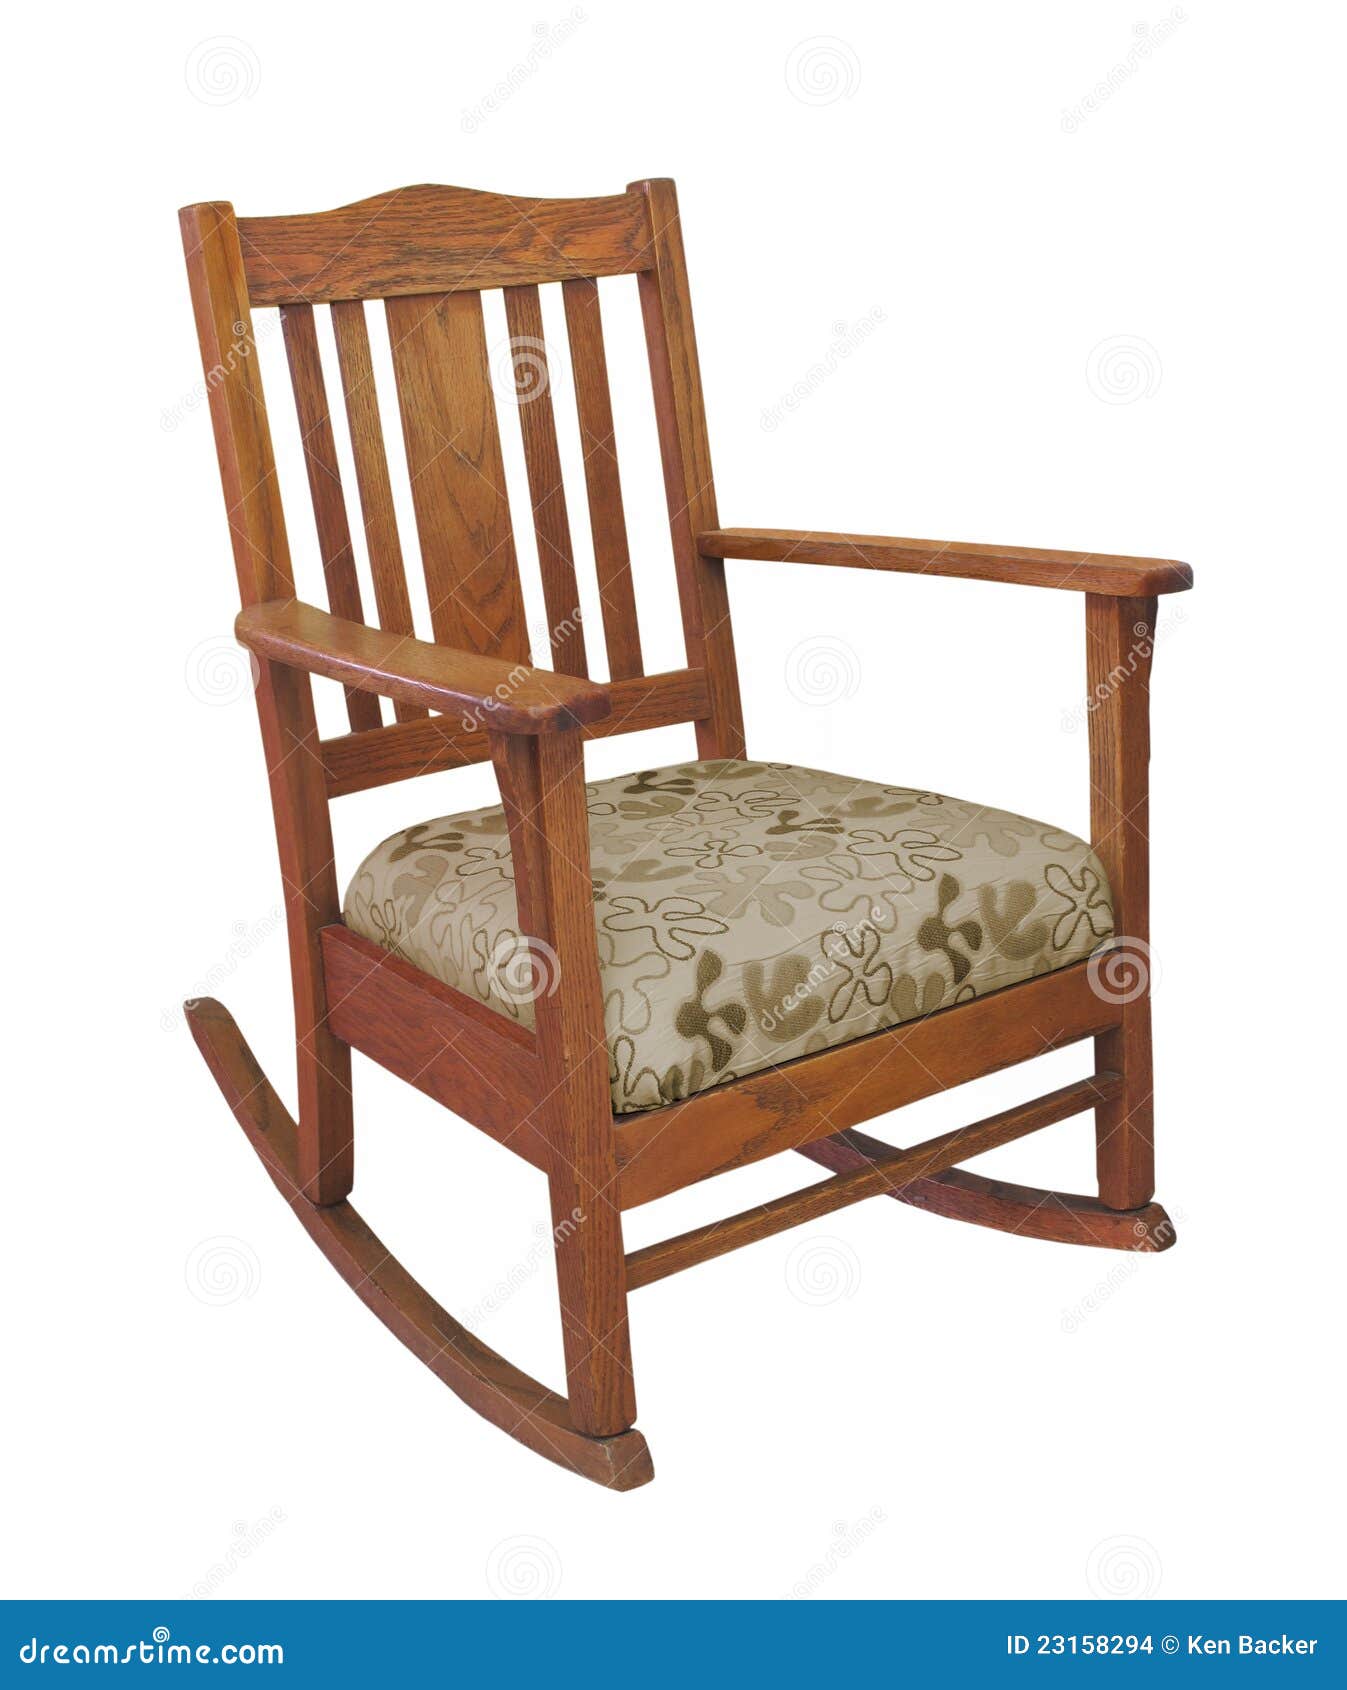 Antique Oak Mission Style Wooden Rocking Chair With Cushion Isolated